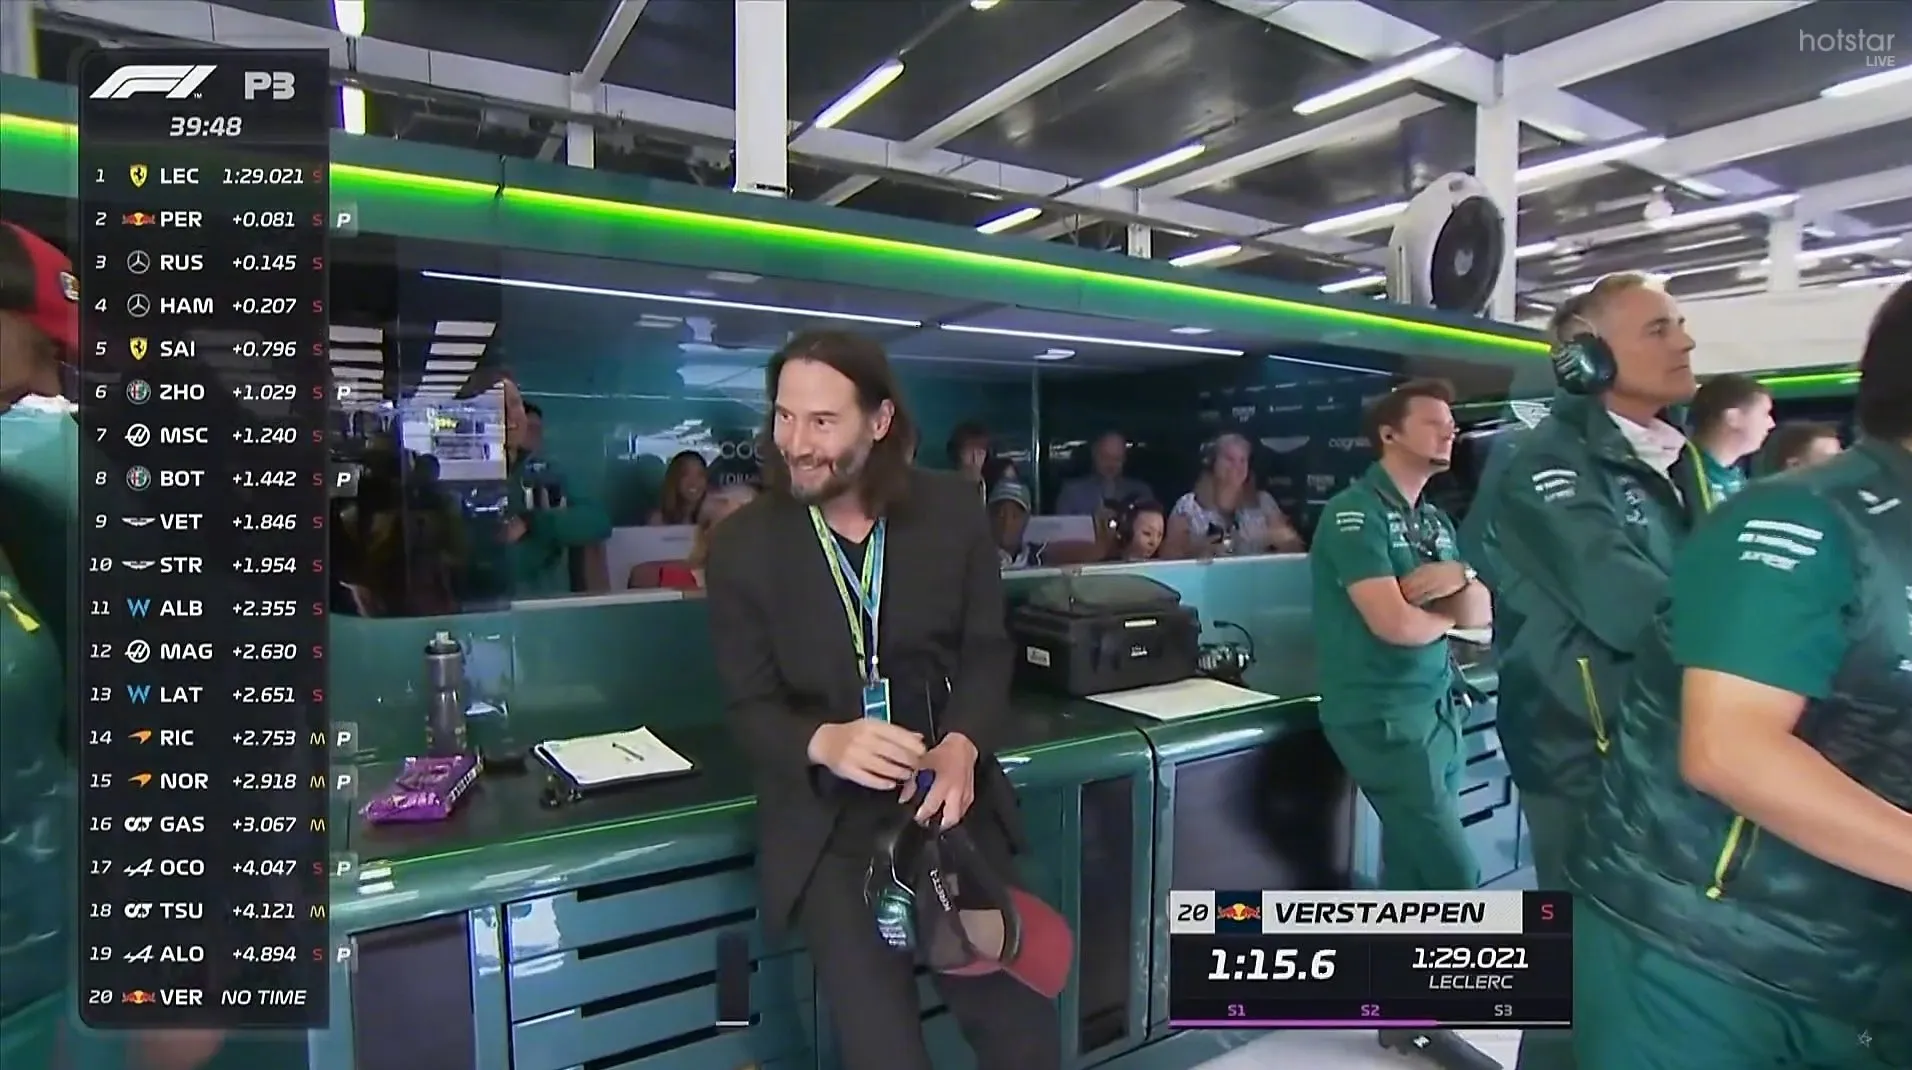 Keanu Reeves Appears at F1 British Grand Prix Silverstone and Watches Qualifying in Heavy Rain | FMV6